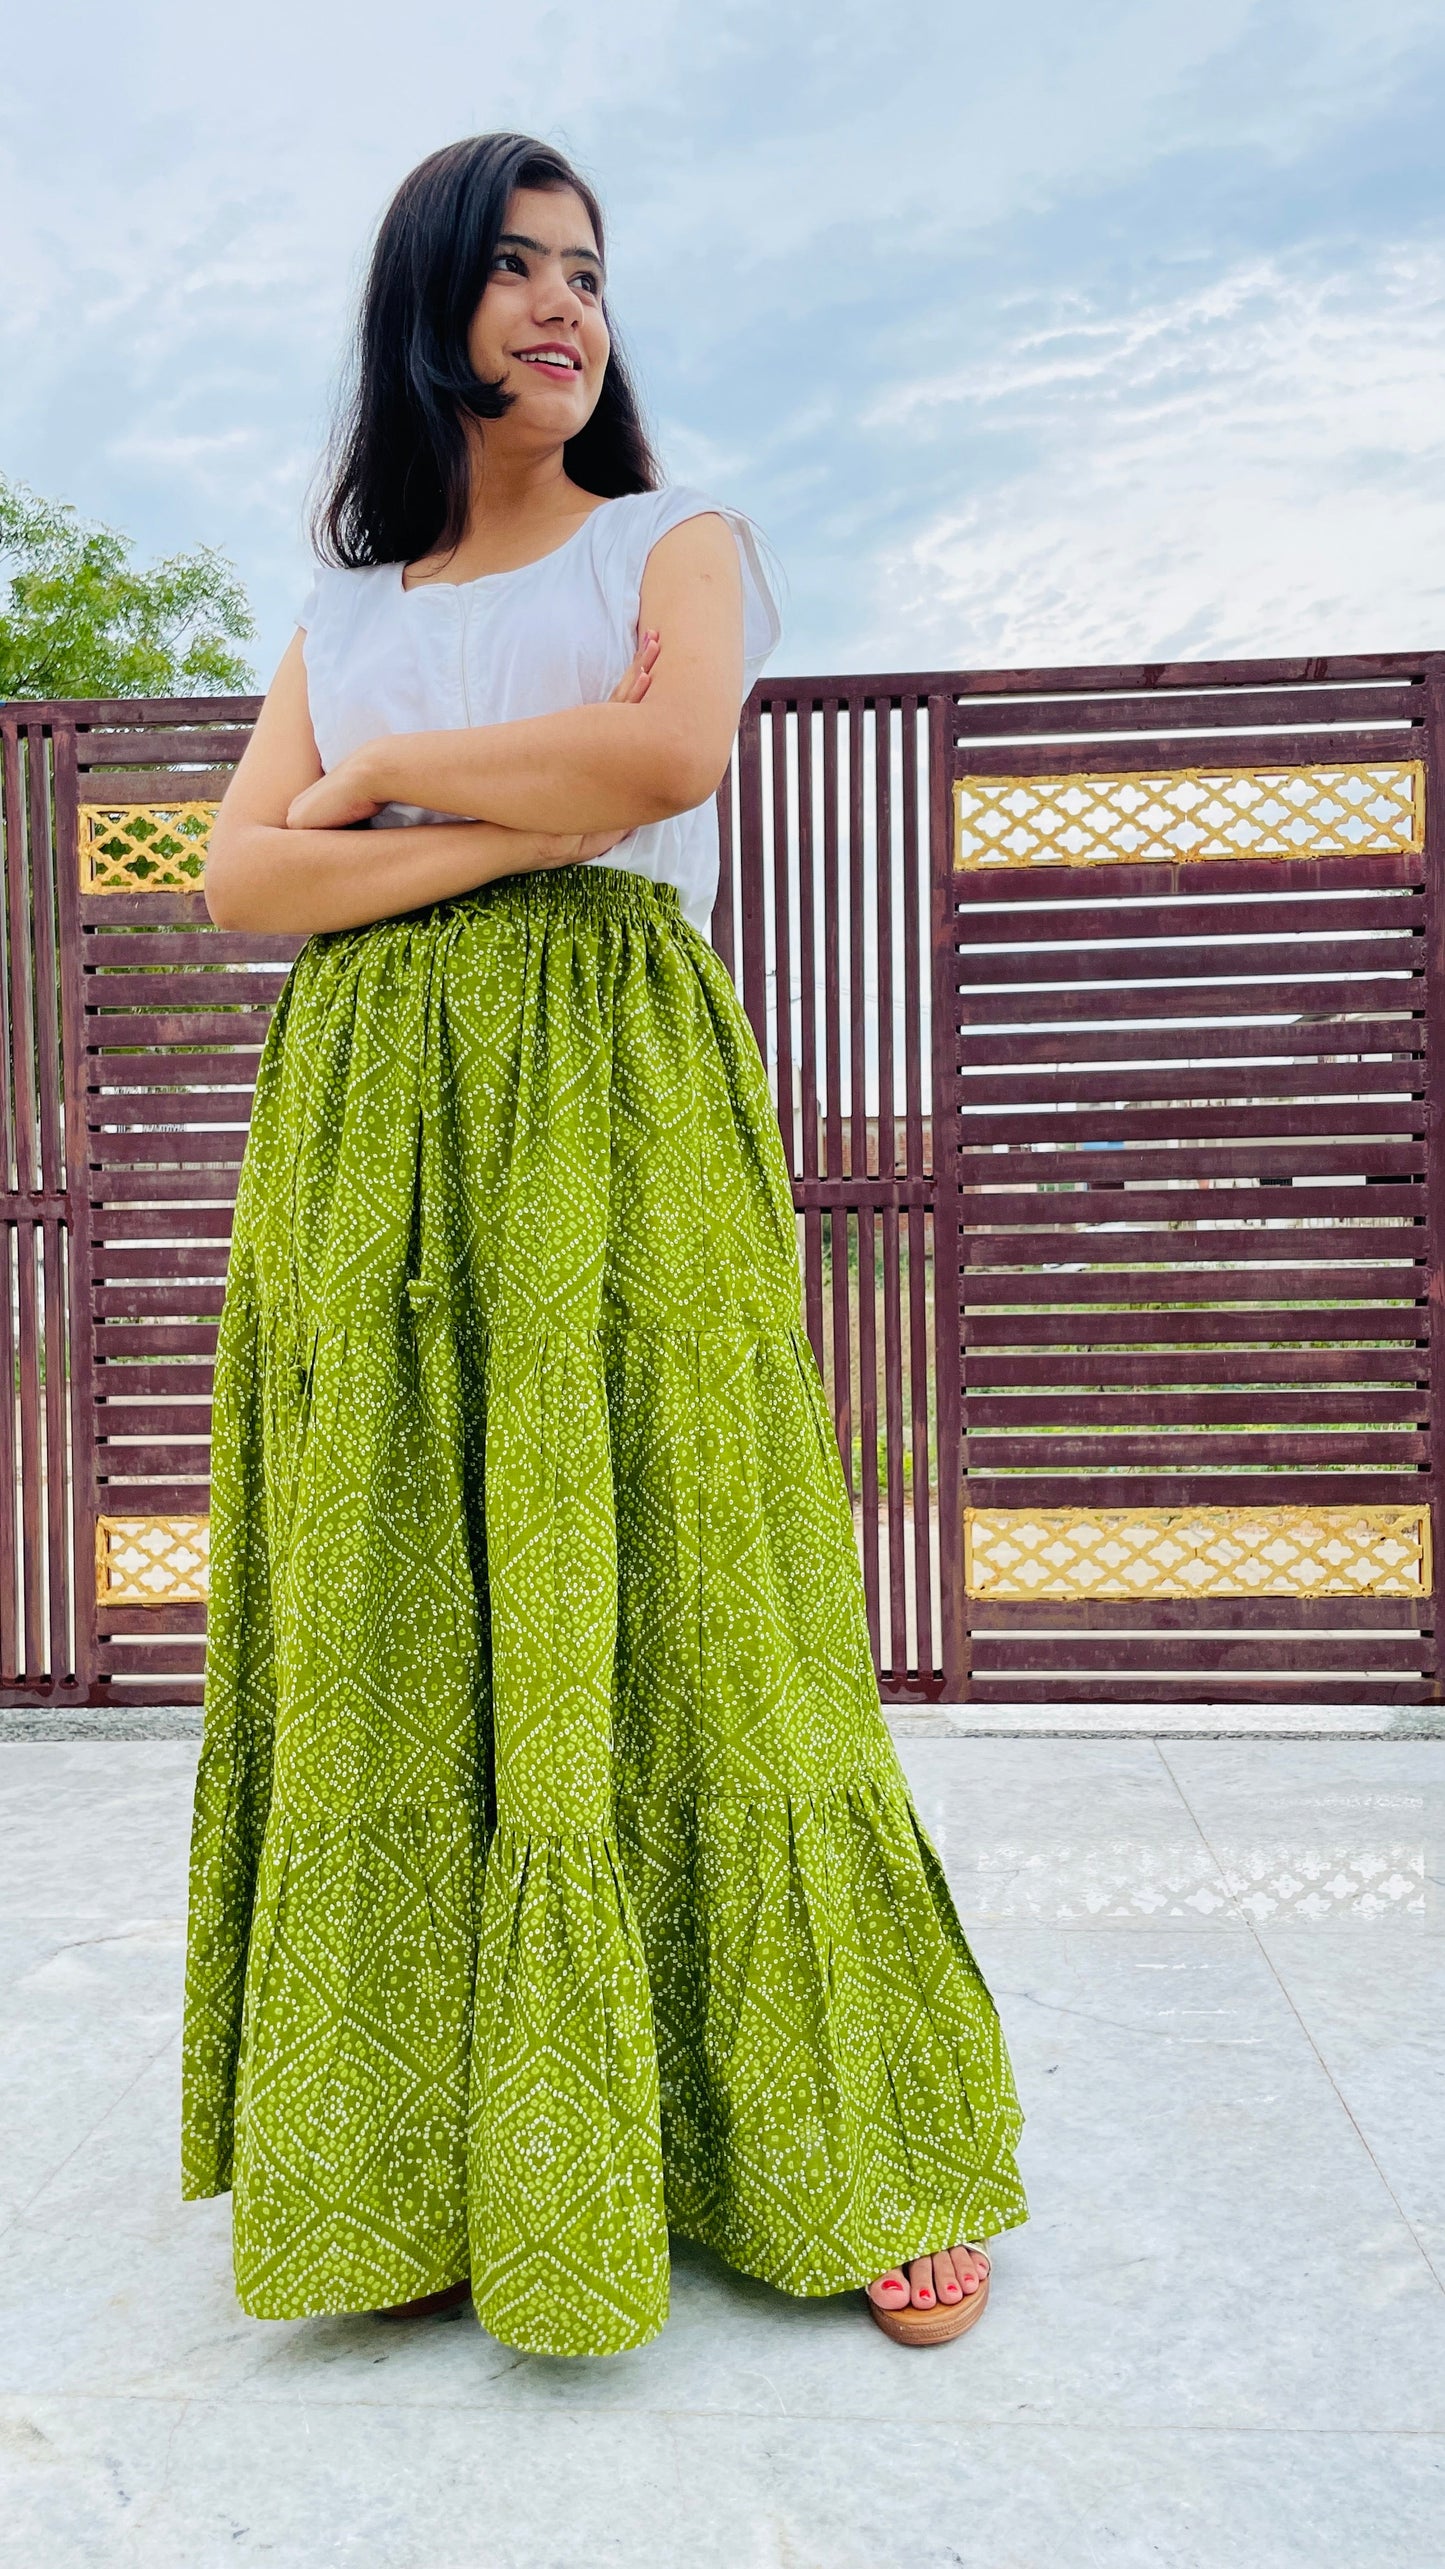 Olive Green Pure Cotton Flared Skirt, Free Size